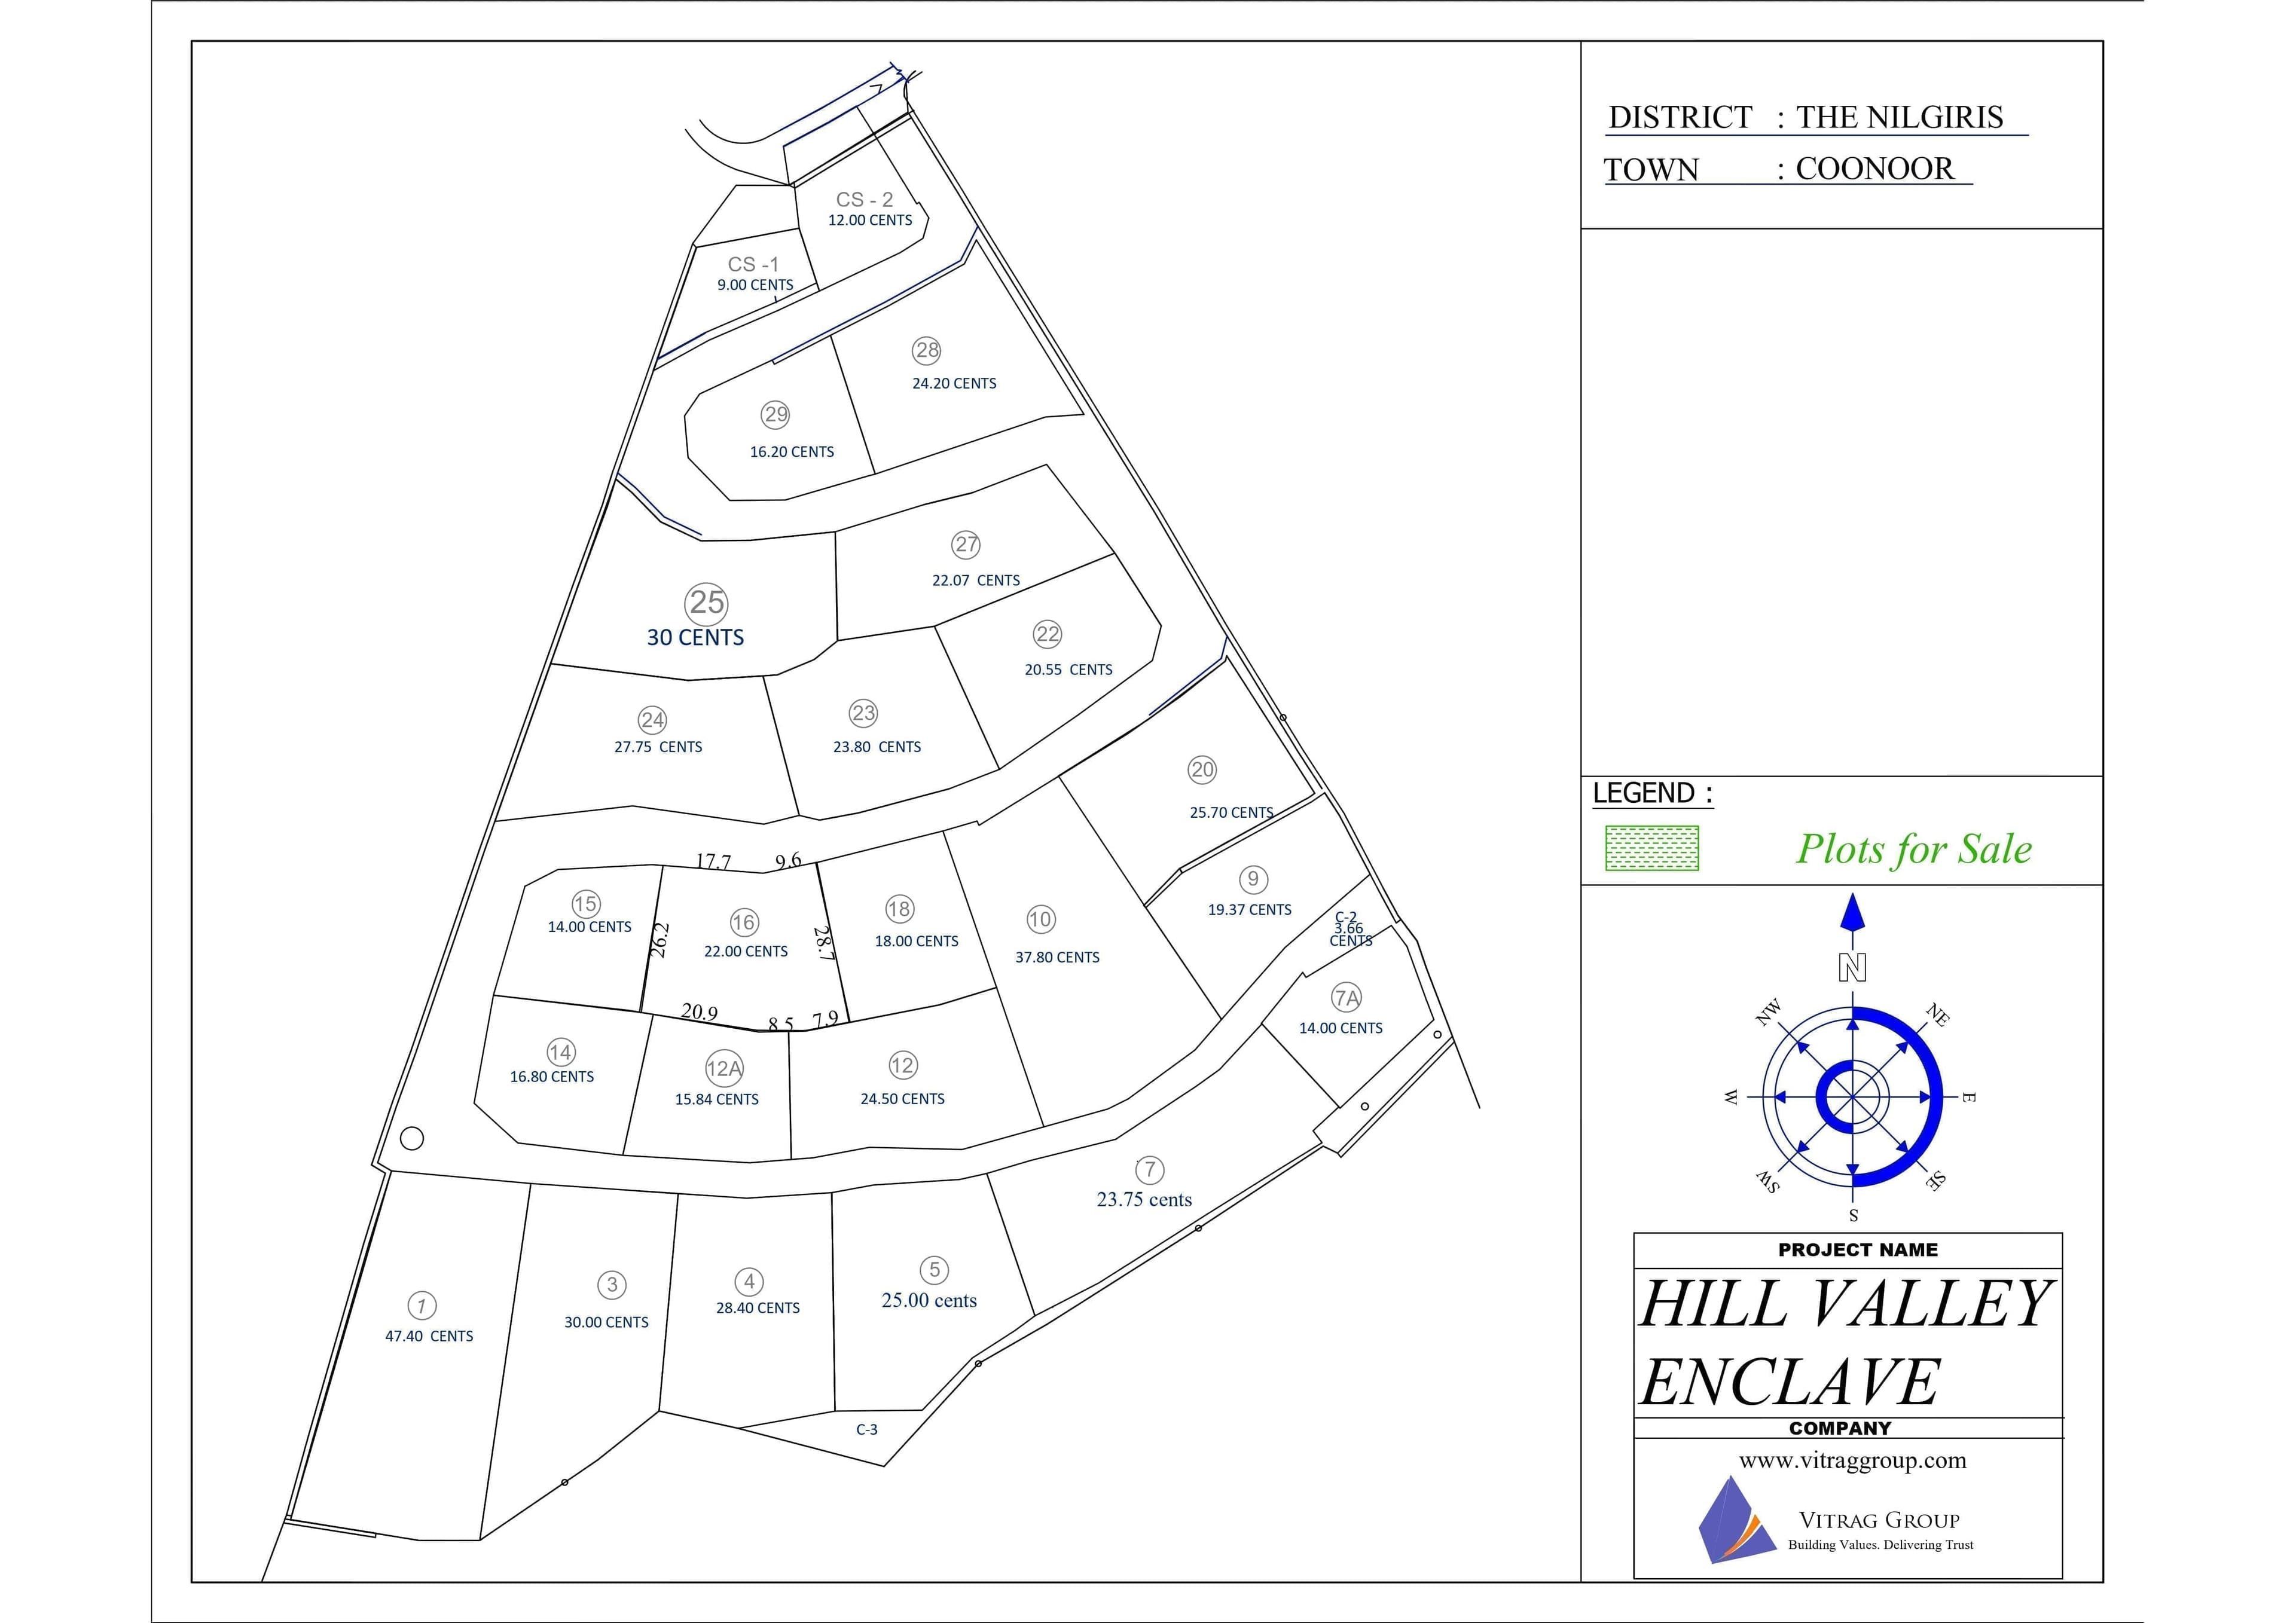 Hill Valley Enclave Layout